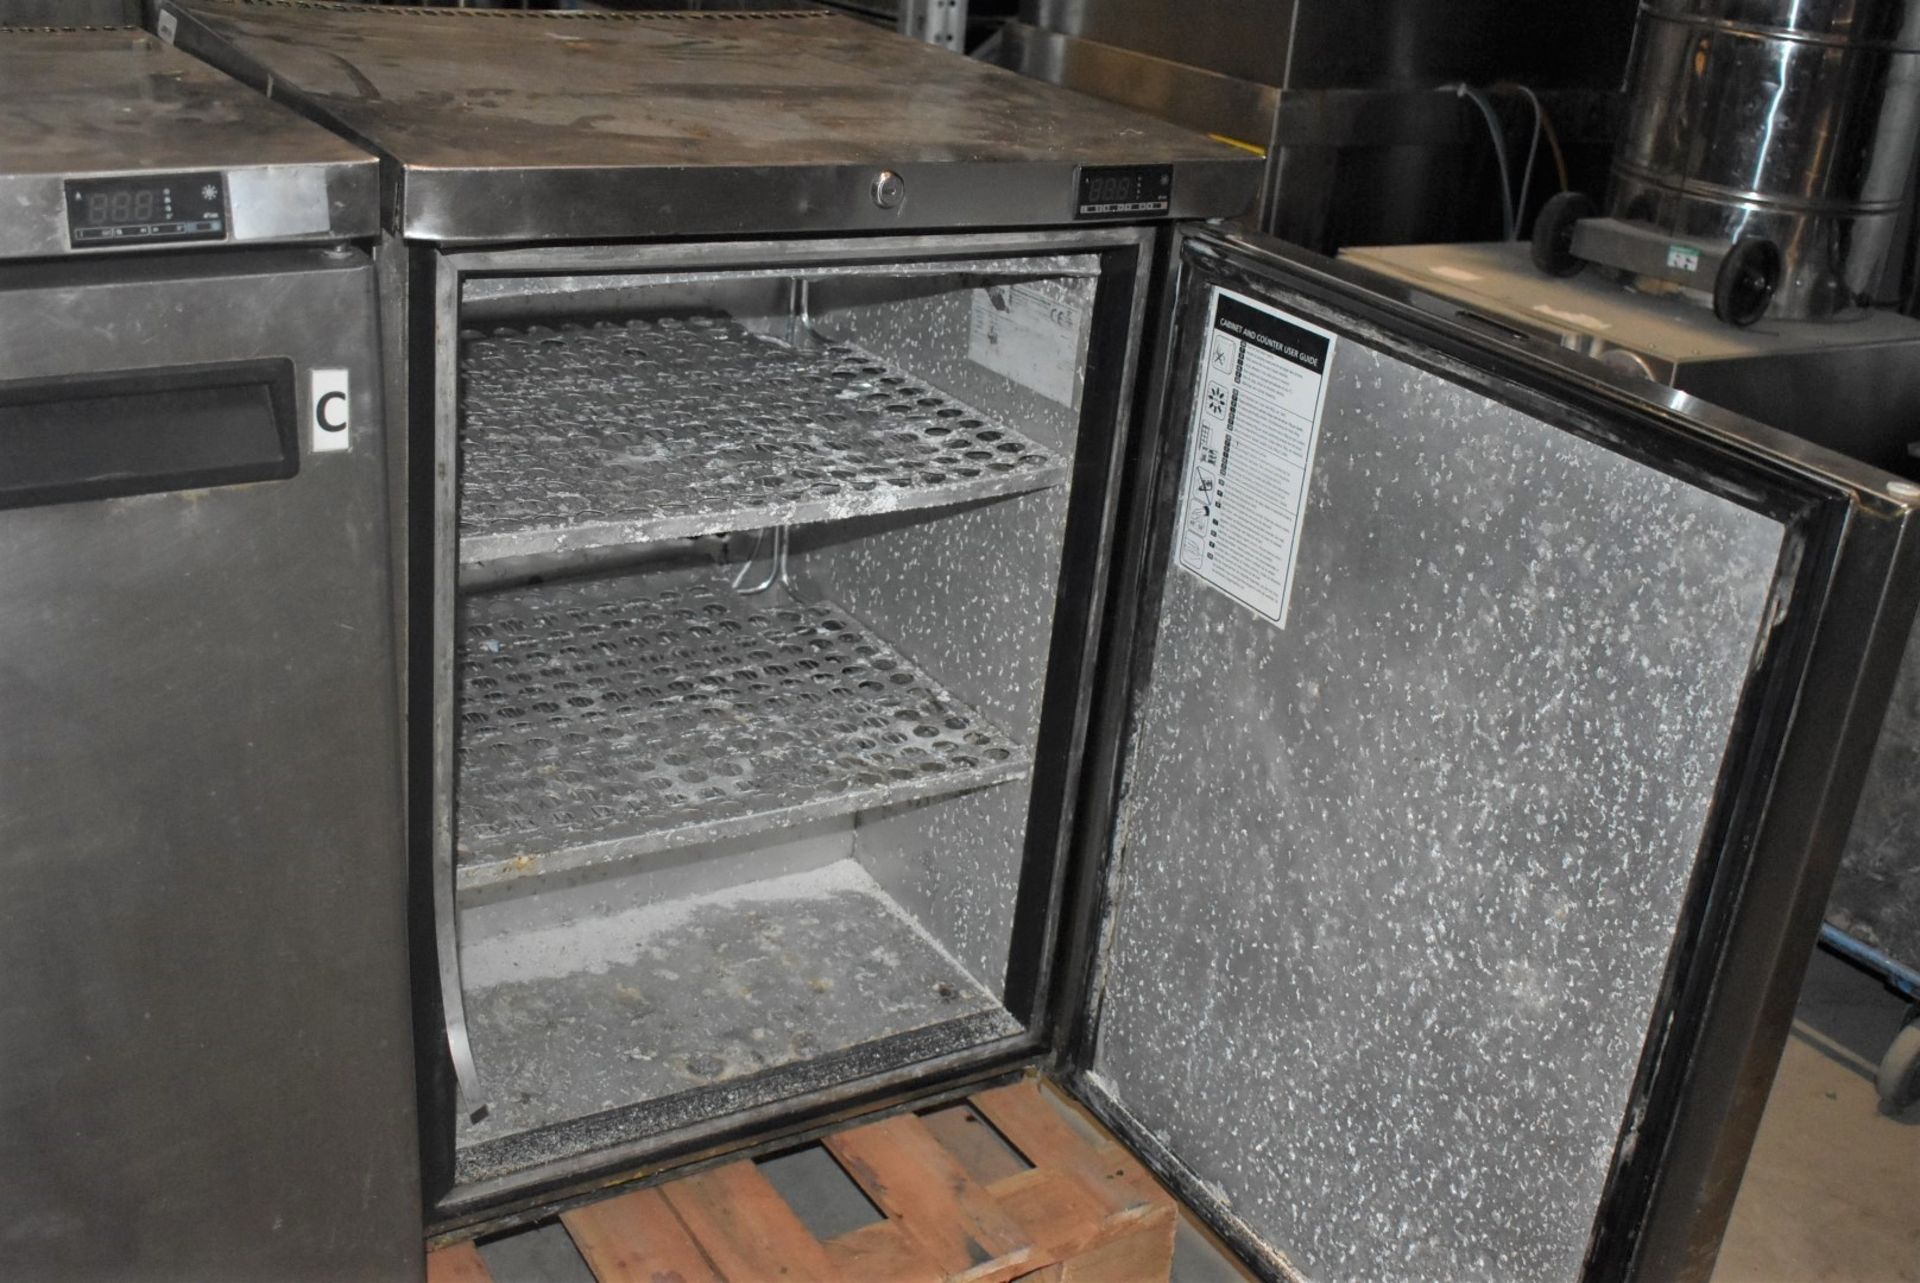 2 x Fosters Undercounter 60cm Freezers With Stainless Steel Exteriors - Image 2 of 4